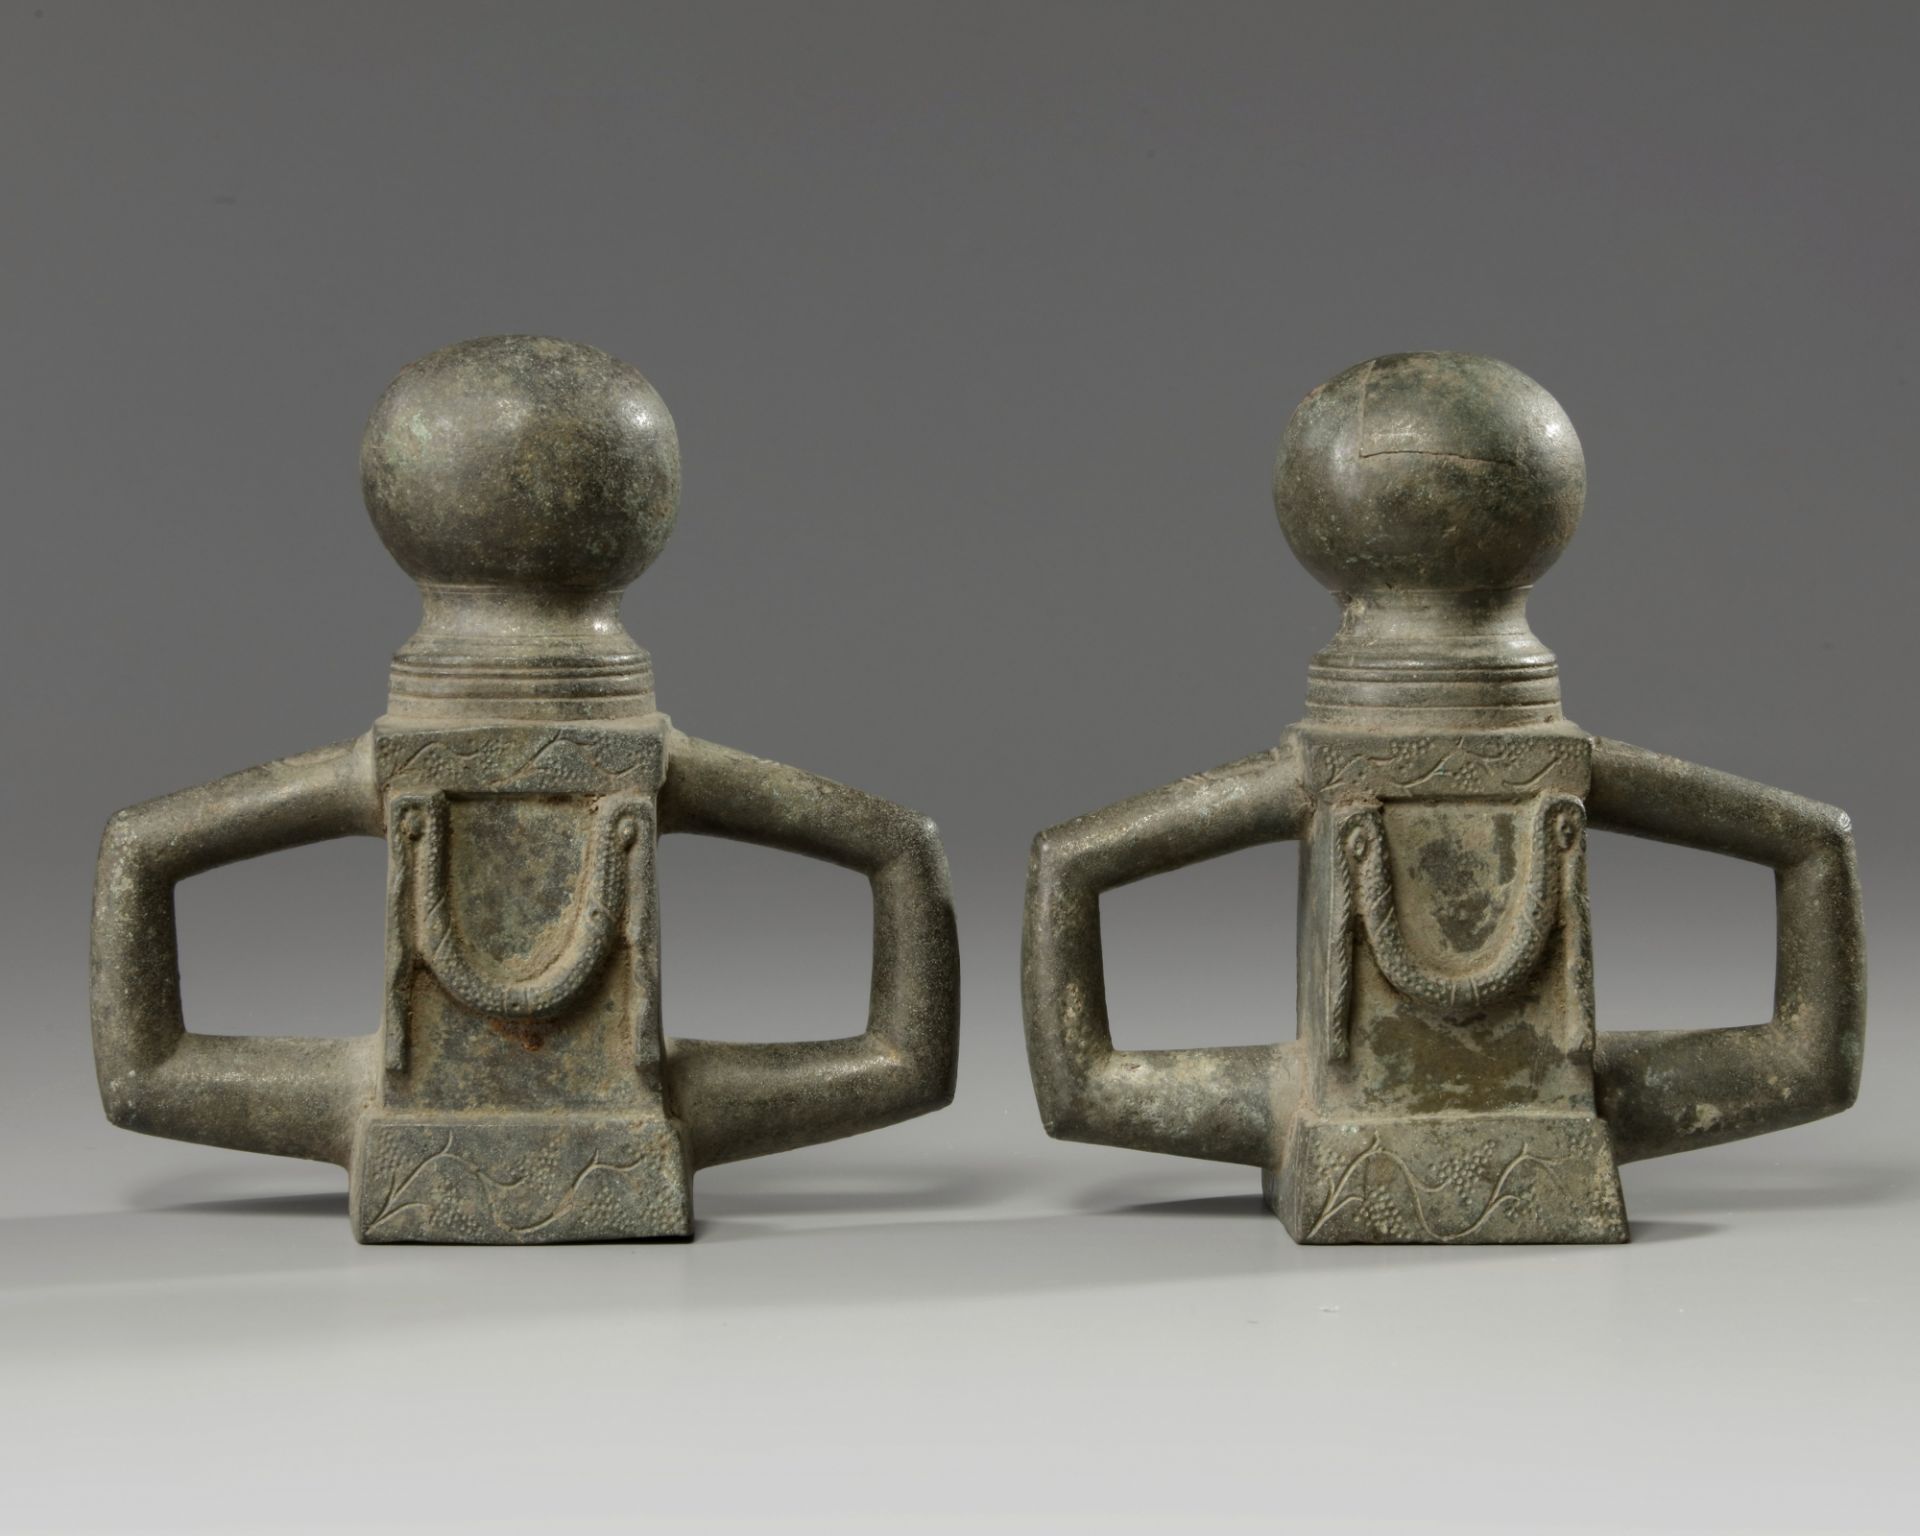 A pair of Roman bronze chariot cleats